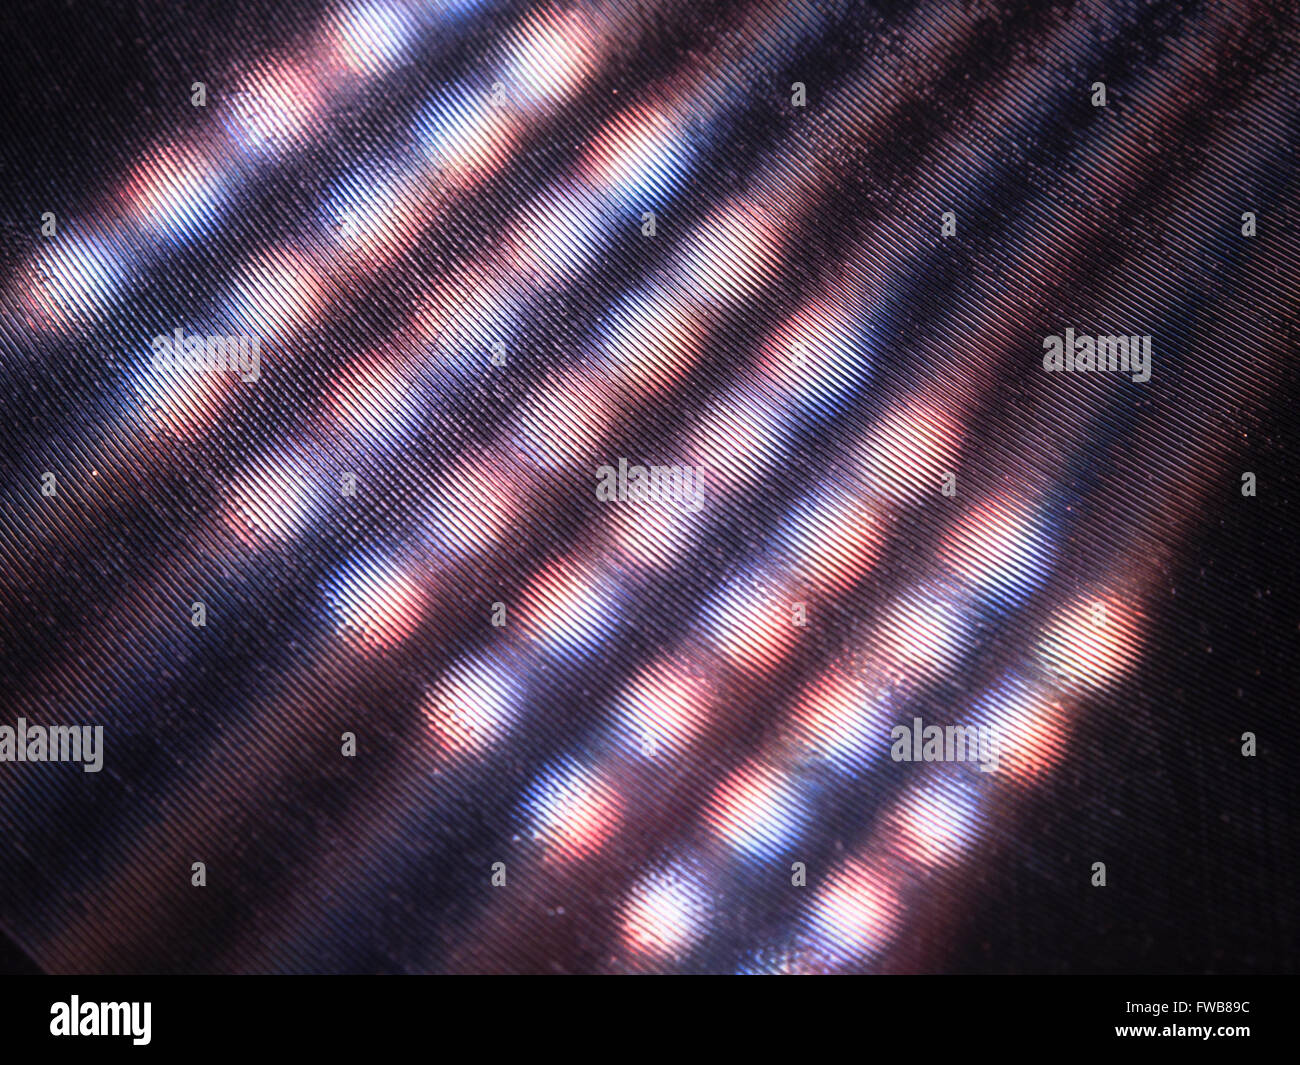 Multi coloured lights reflected in the grooves of an old shellac record Stock Photo